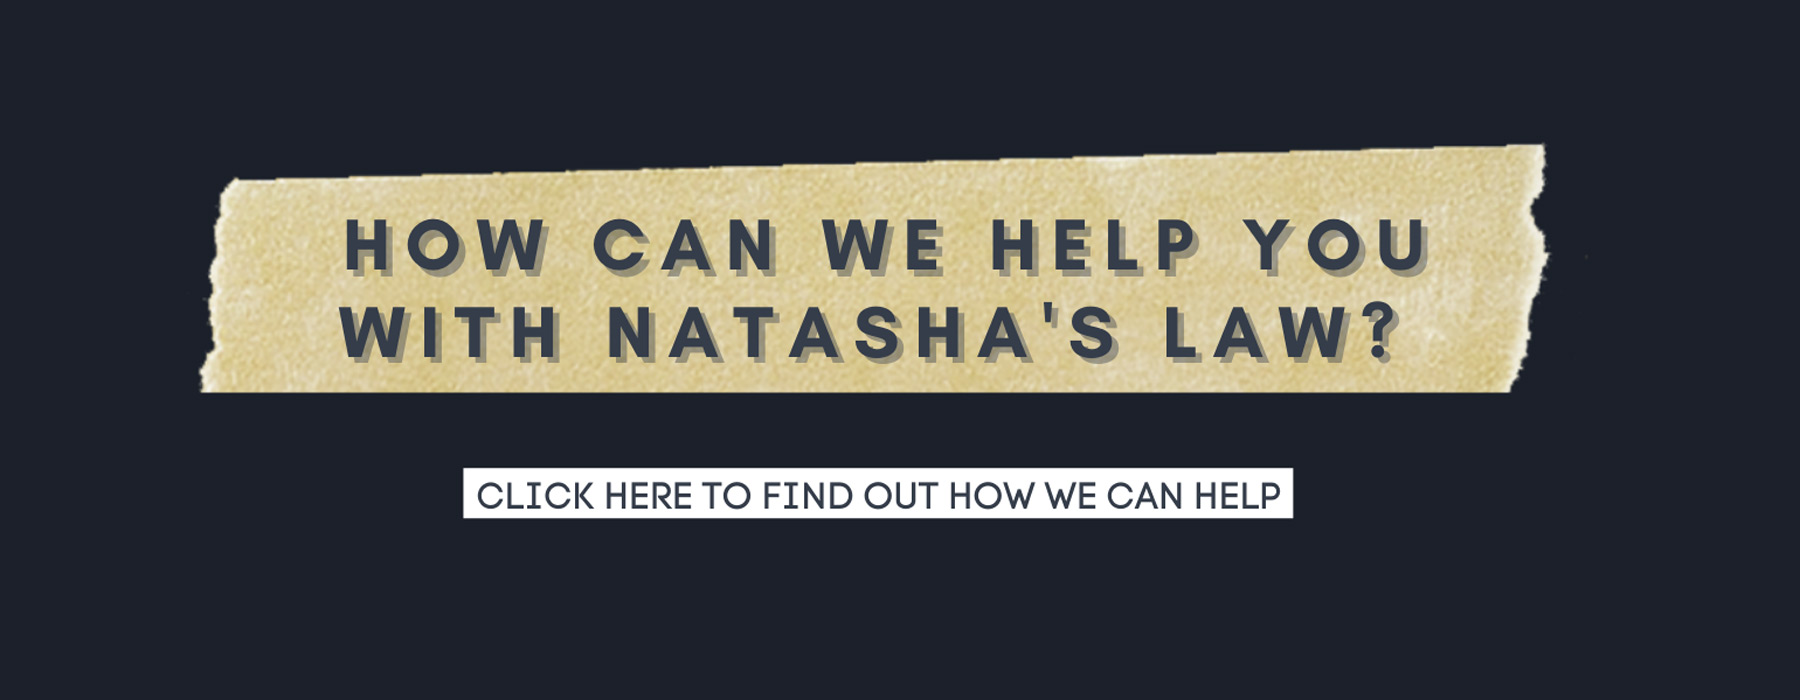 Is your business ready for Natasha's Law? Find out how we can help